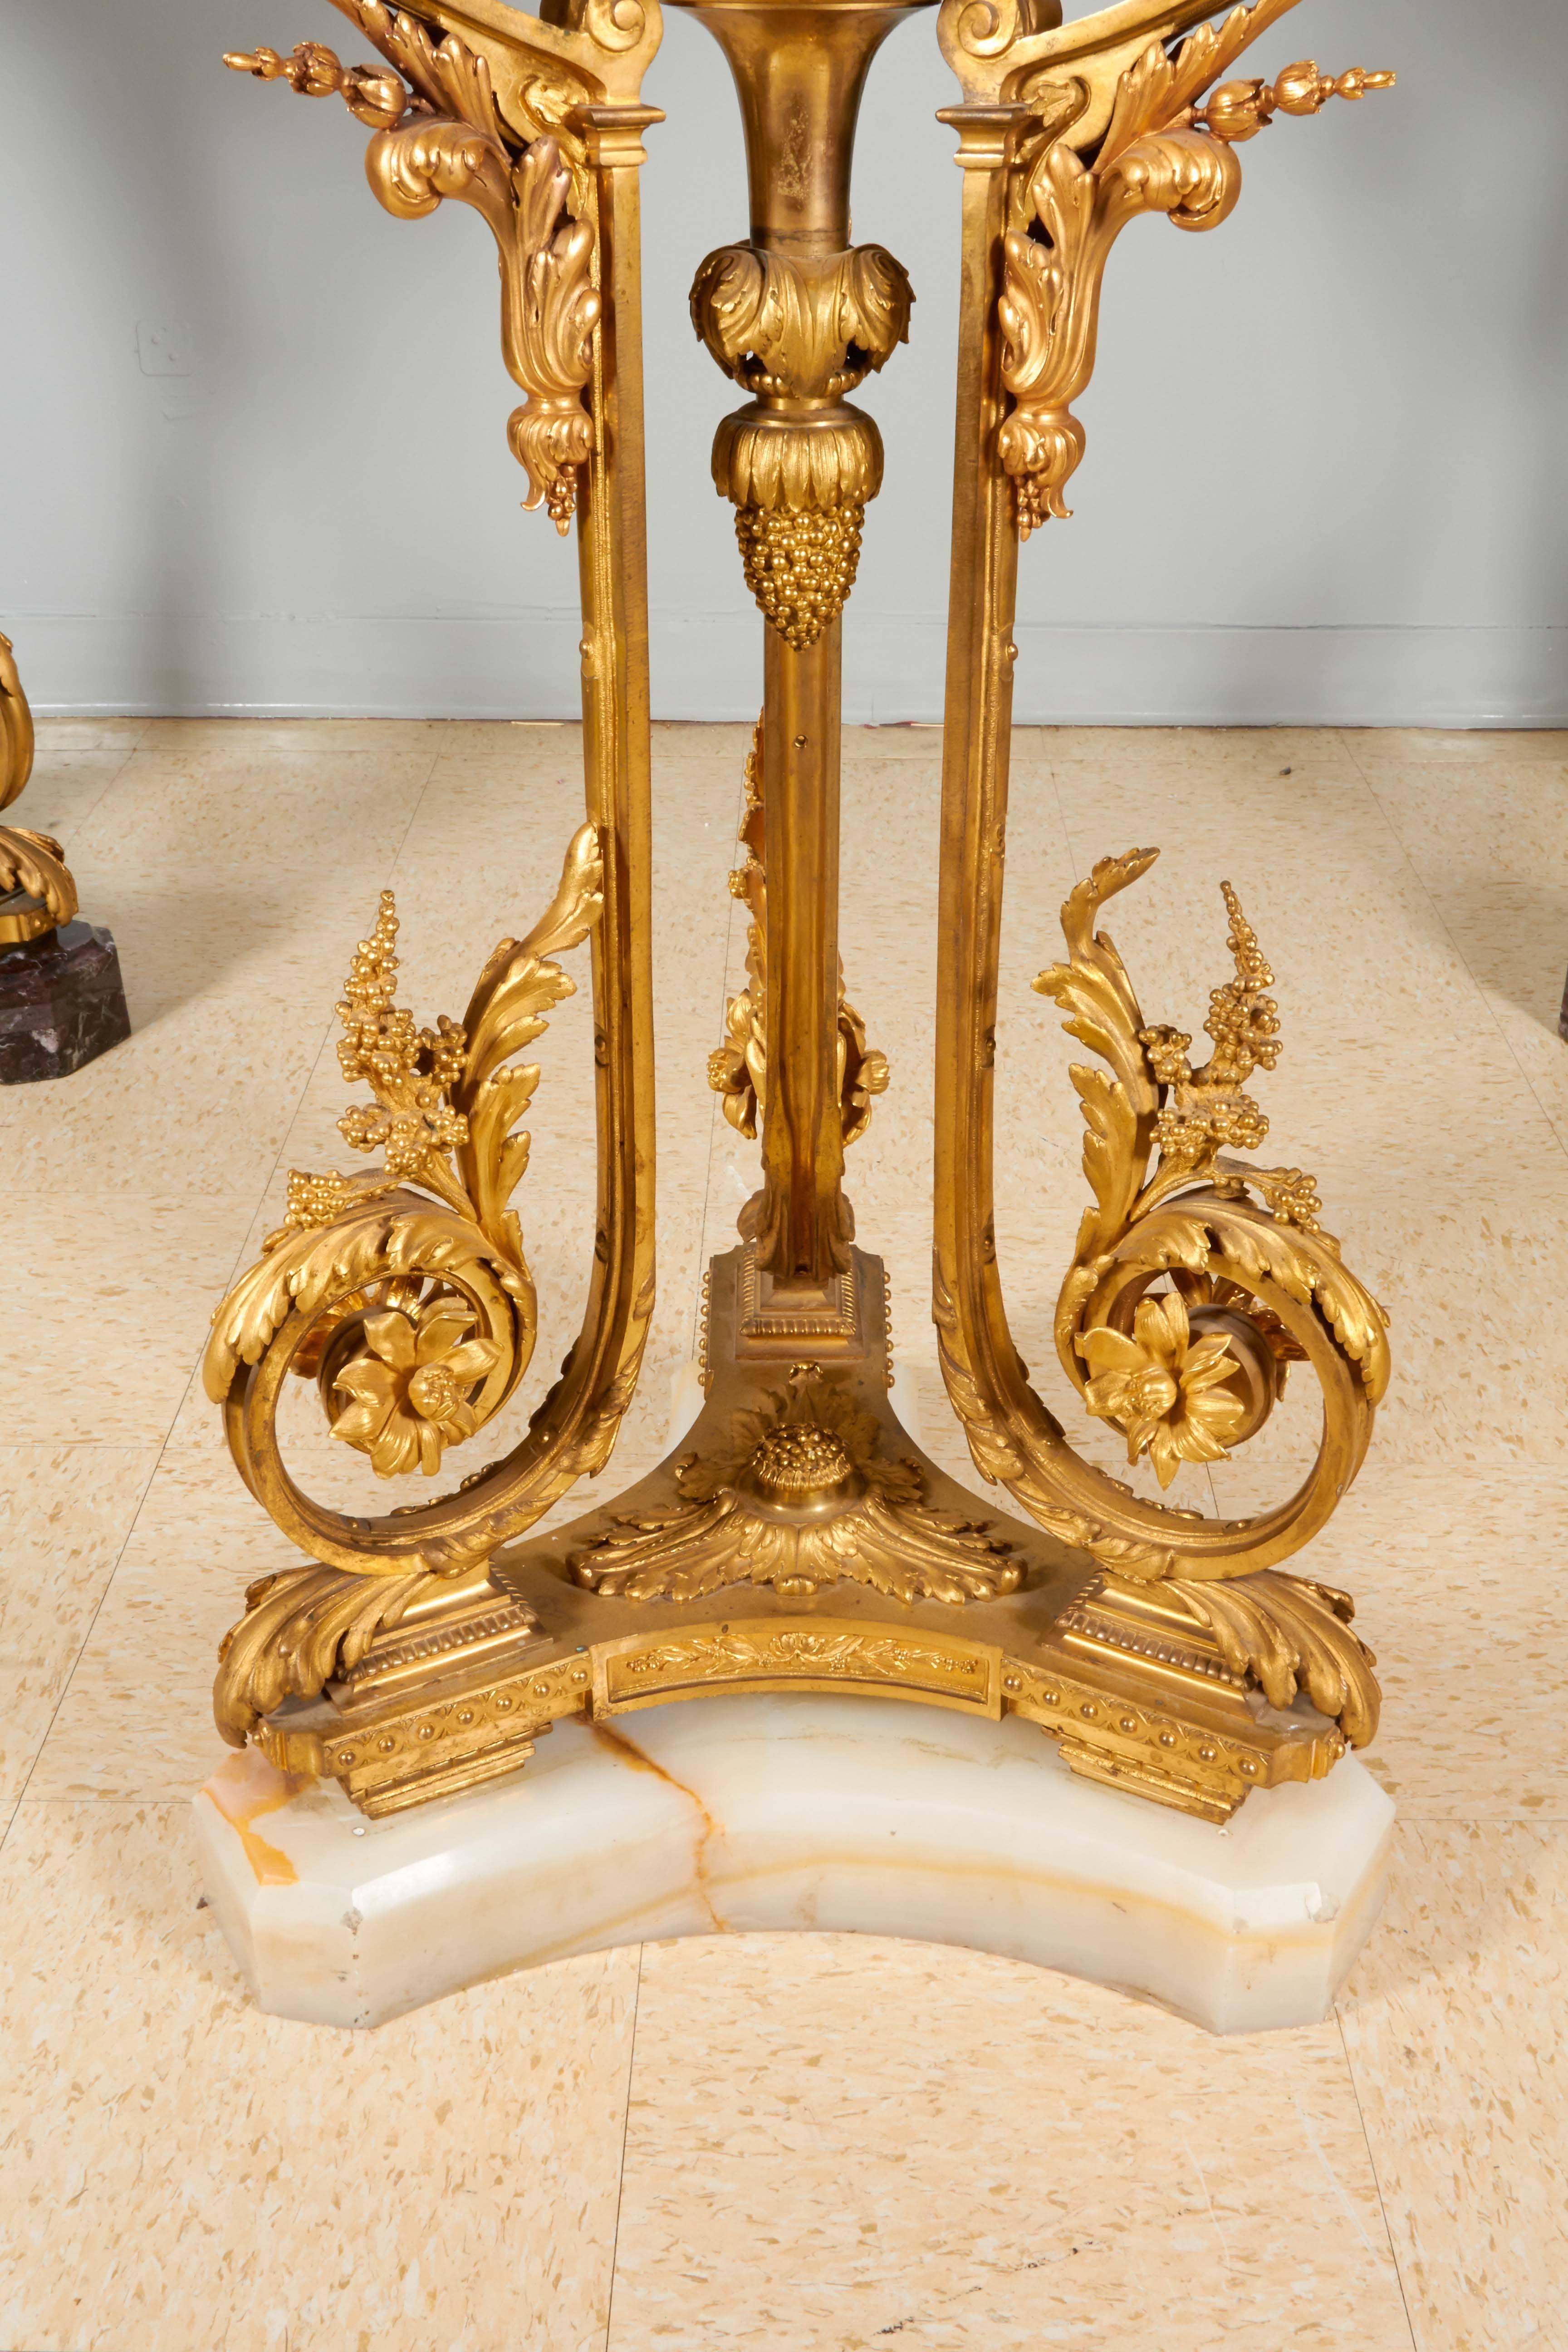 French Important and Palatial Ormolu and Sèvres Style Porcelain Jardiniere Vase